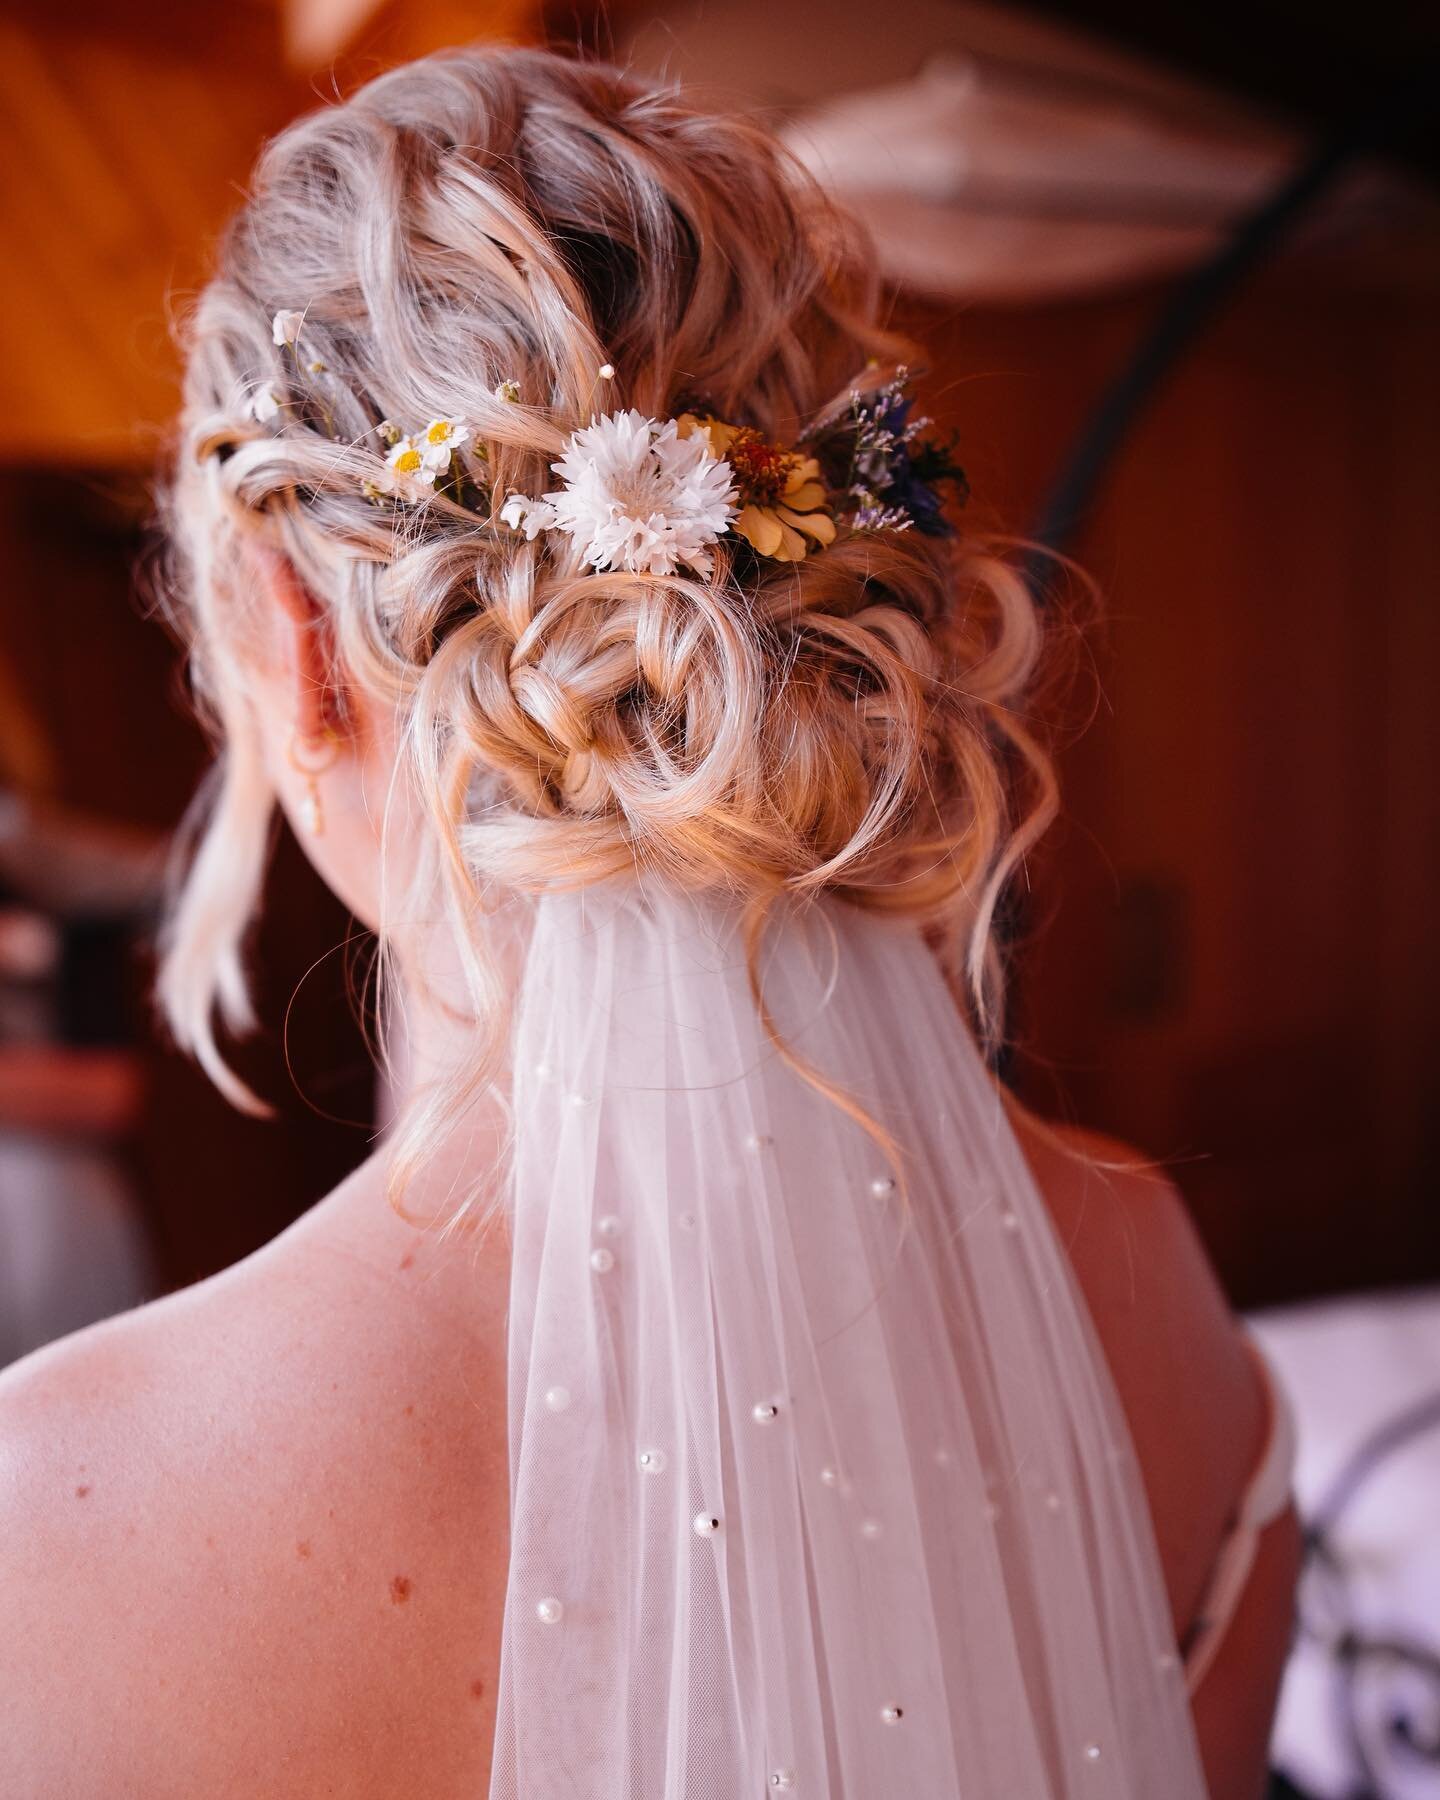 Detail shots of @meghanvestad wedding hair by @jeffofmitchell